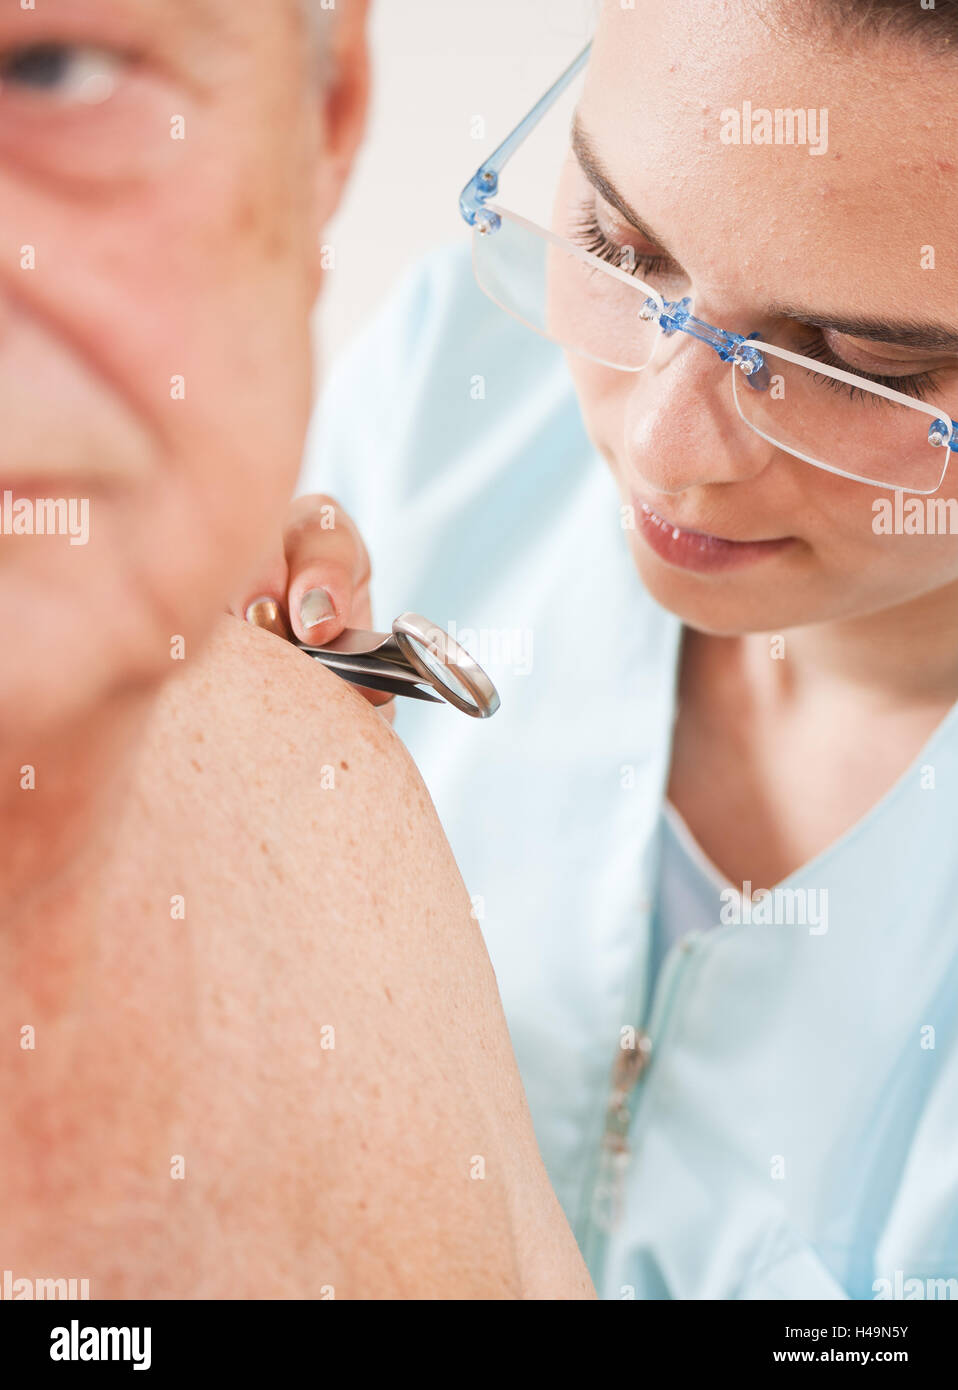 Boss is examined by young dermatologist, Stock Photo